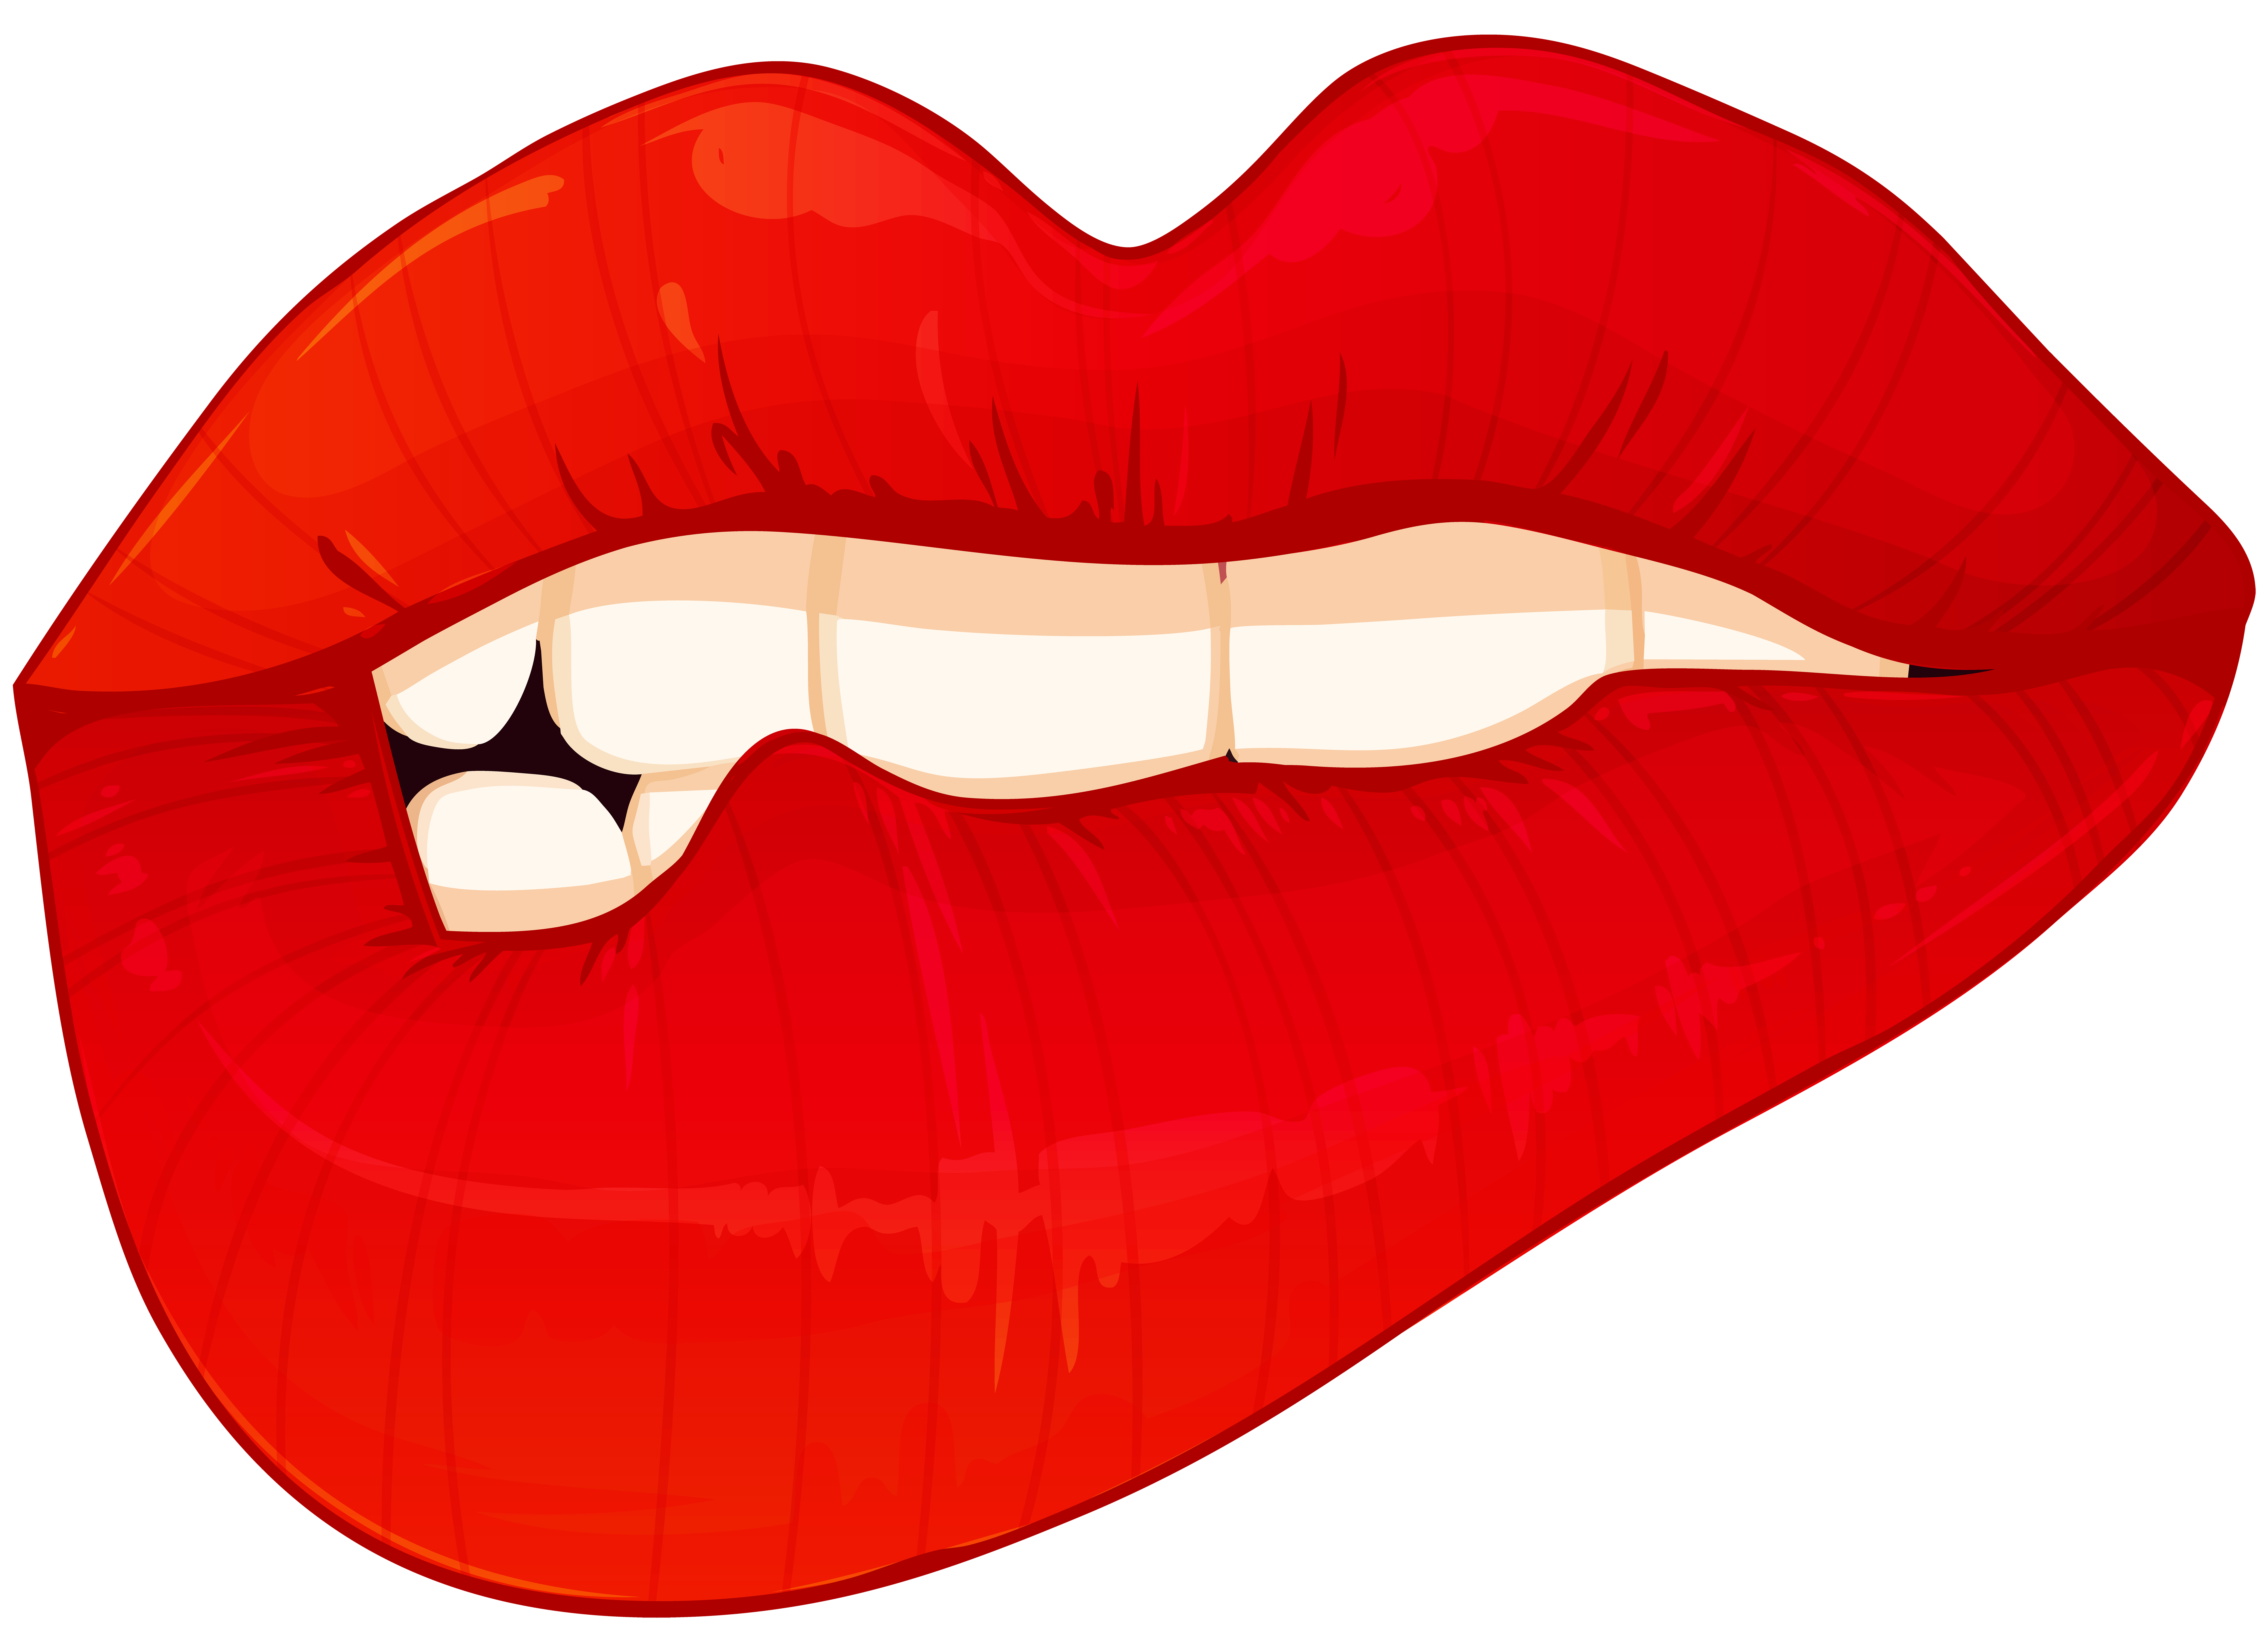 Lips Png Clipart - Red lips graphic art, lip mouth kiss, lips, face,fashion...